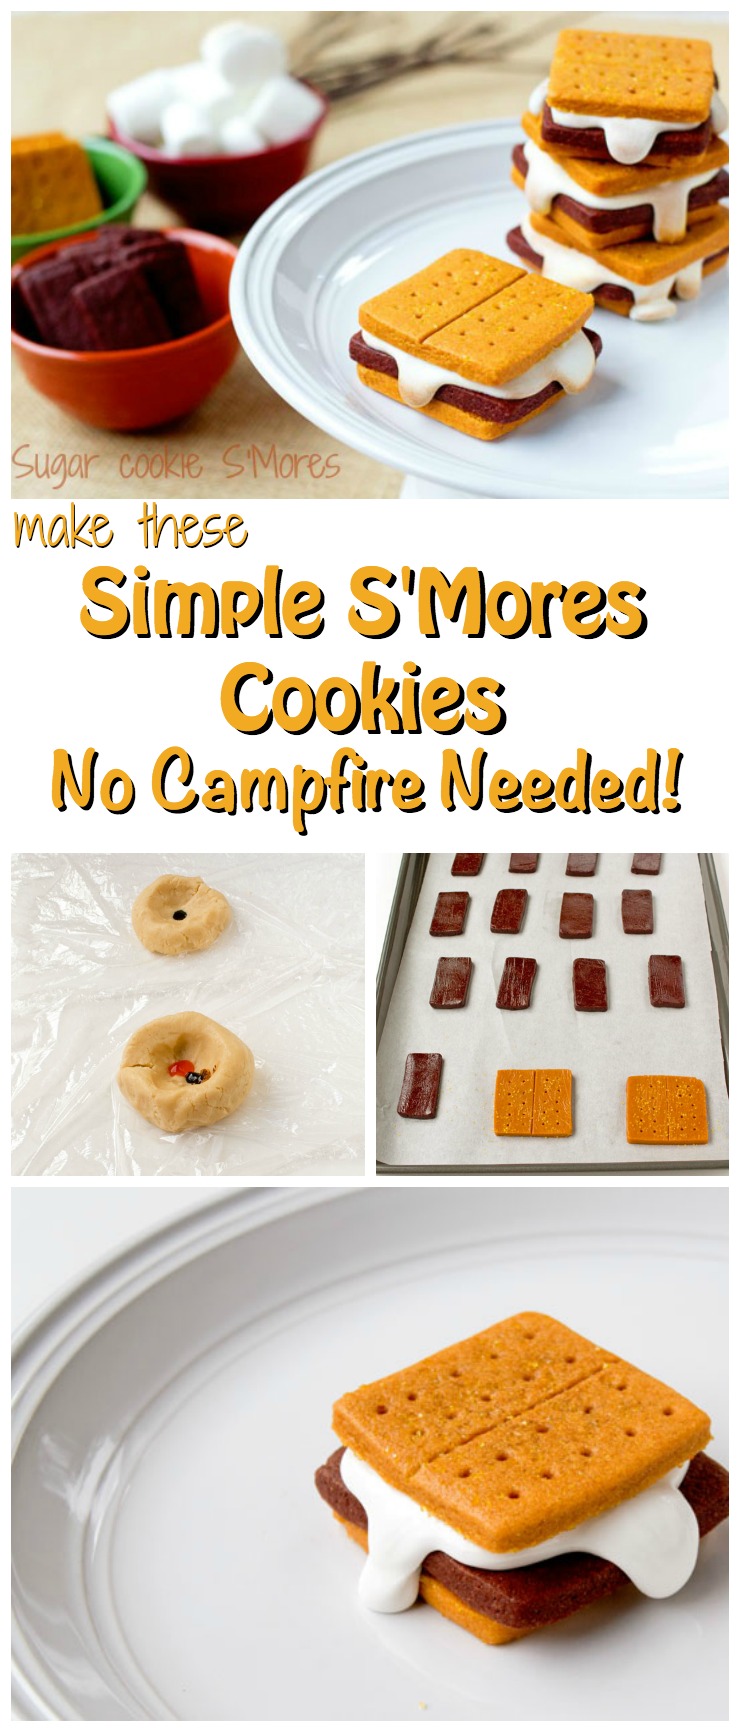 Make these Simple S'Mores Cookies No Campfire Needed via www.thebearfootbaker.com